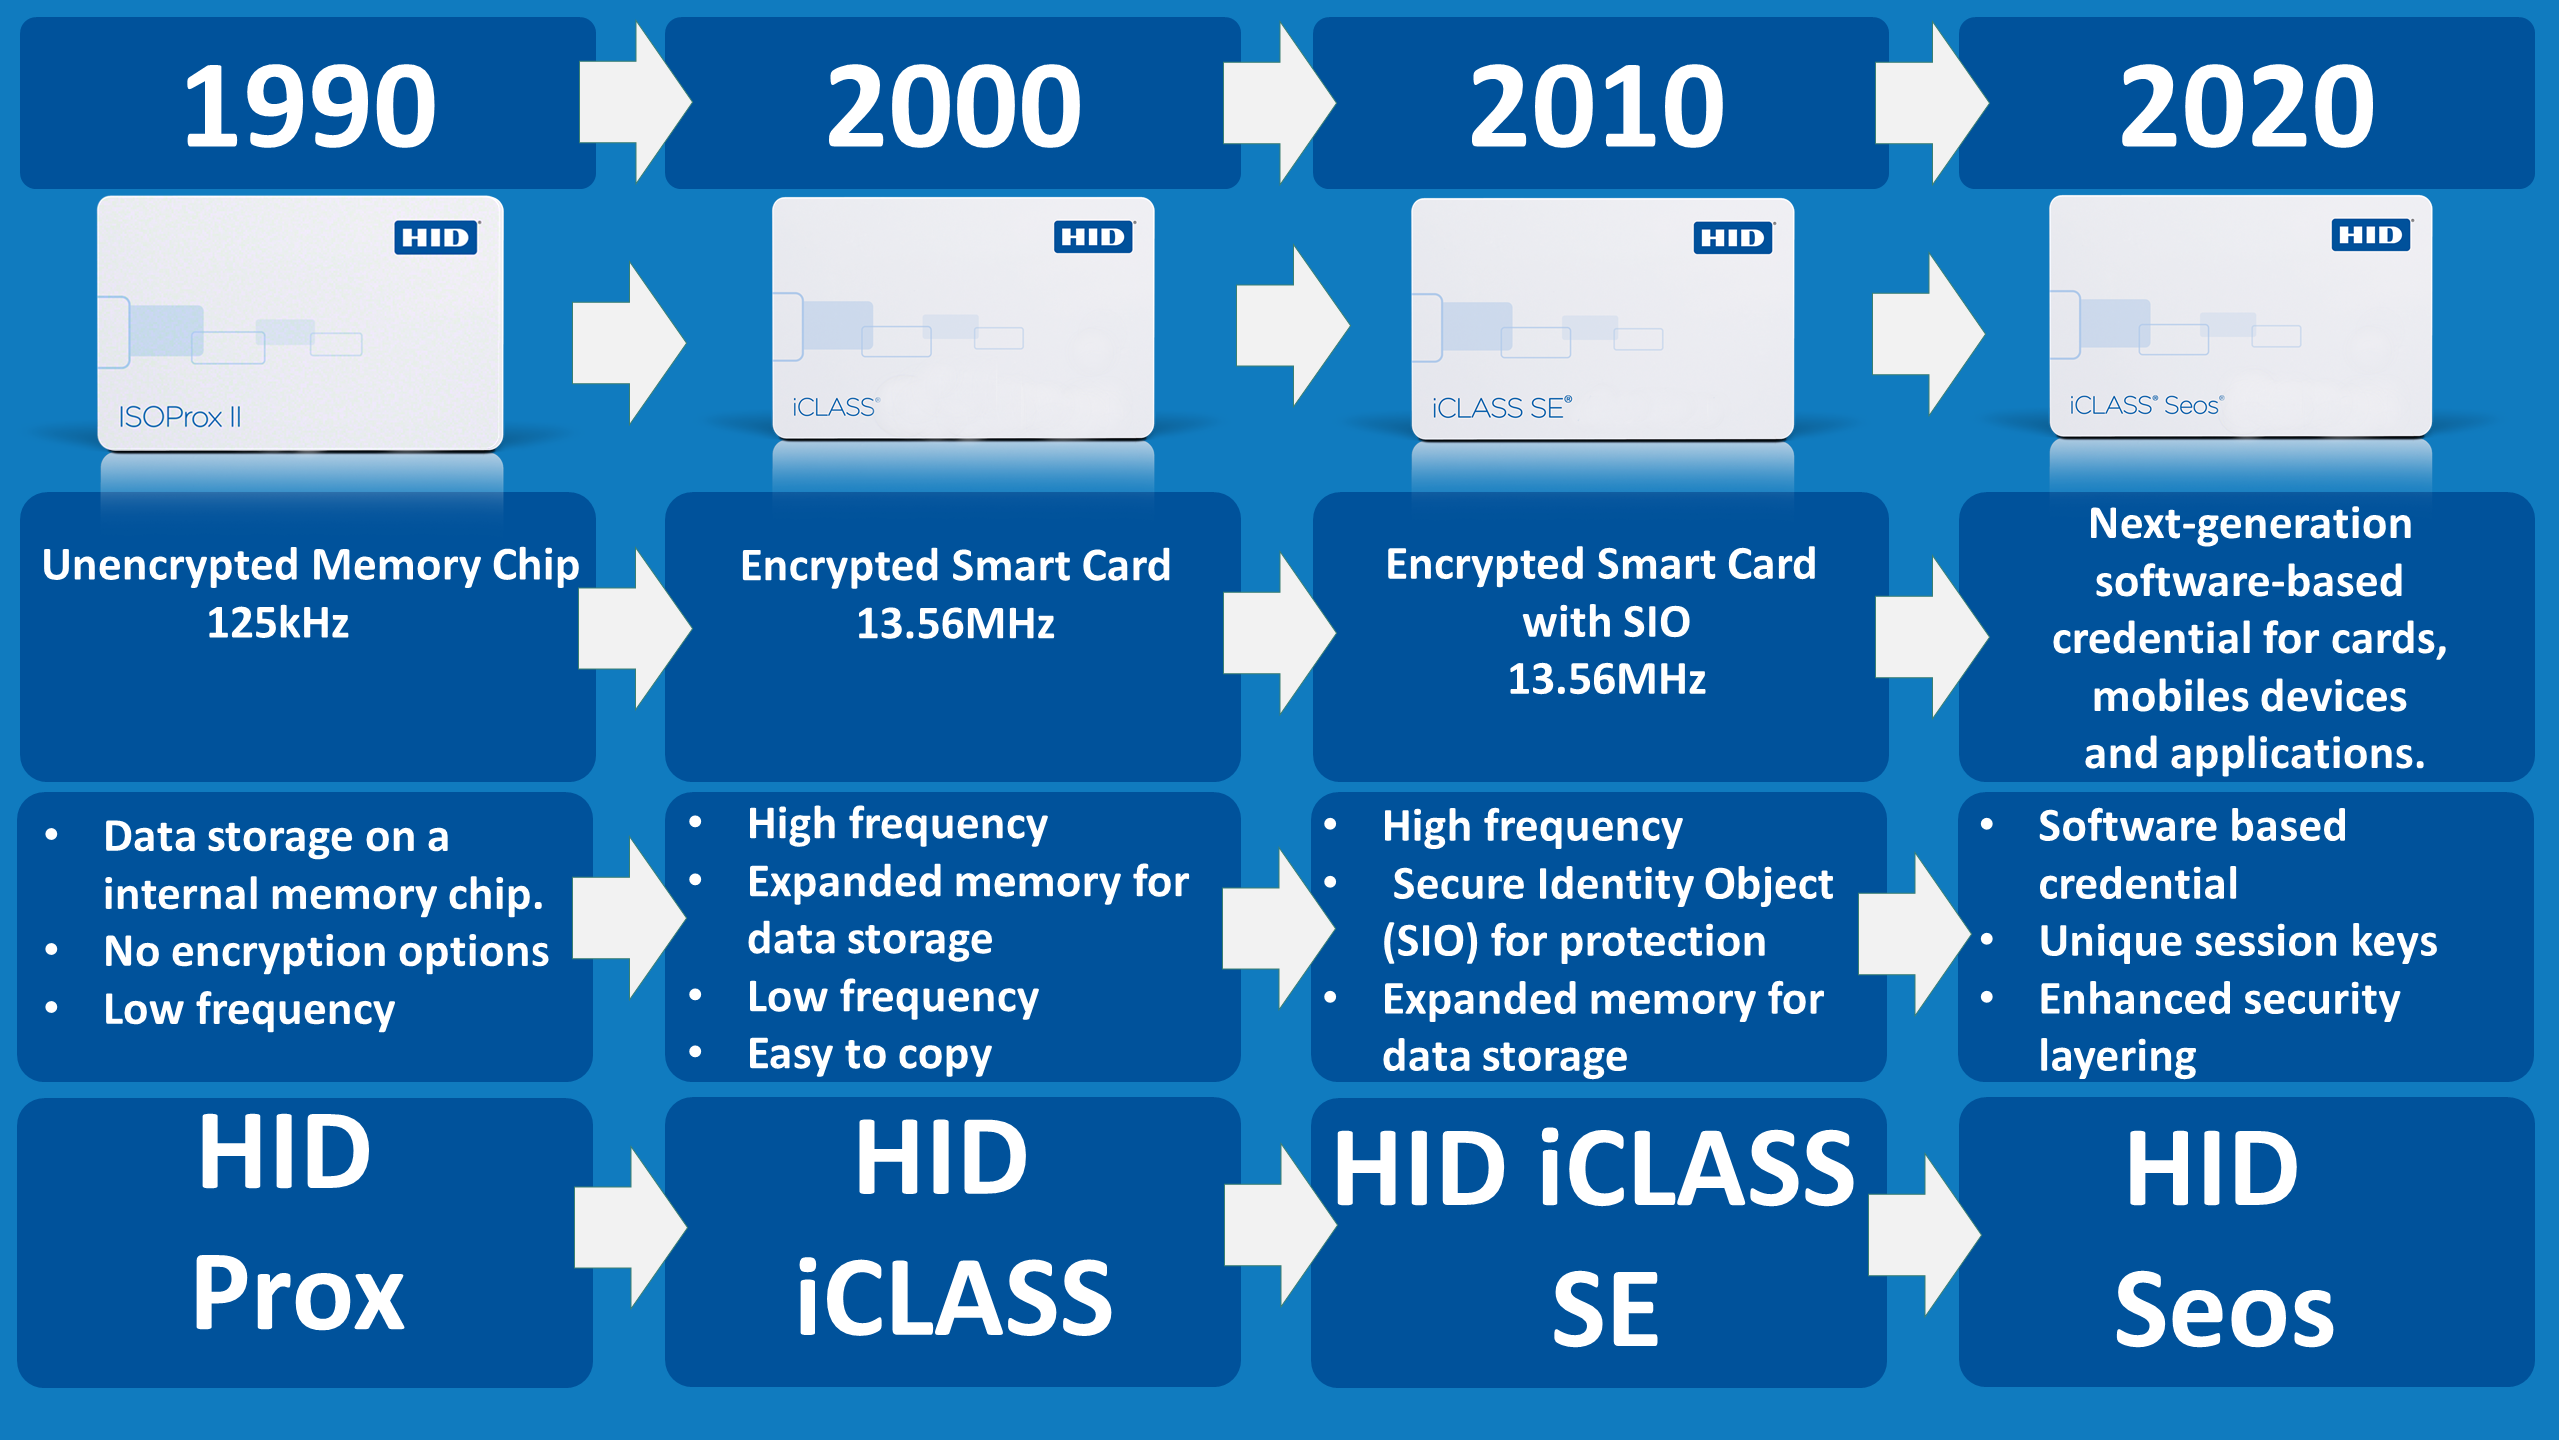 HID cards guide: Which are the main technologies? Digital ID